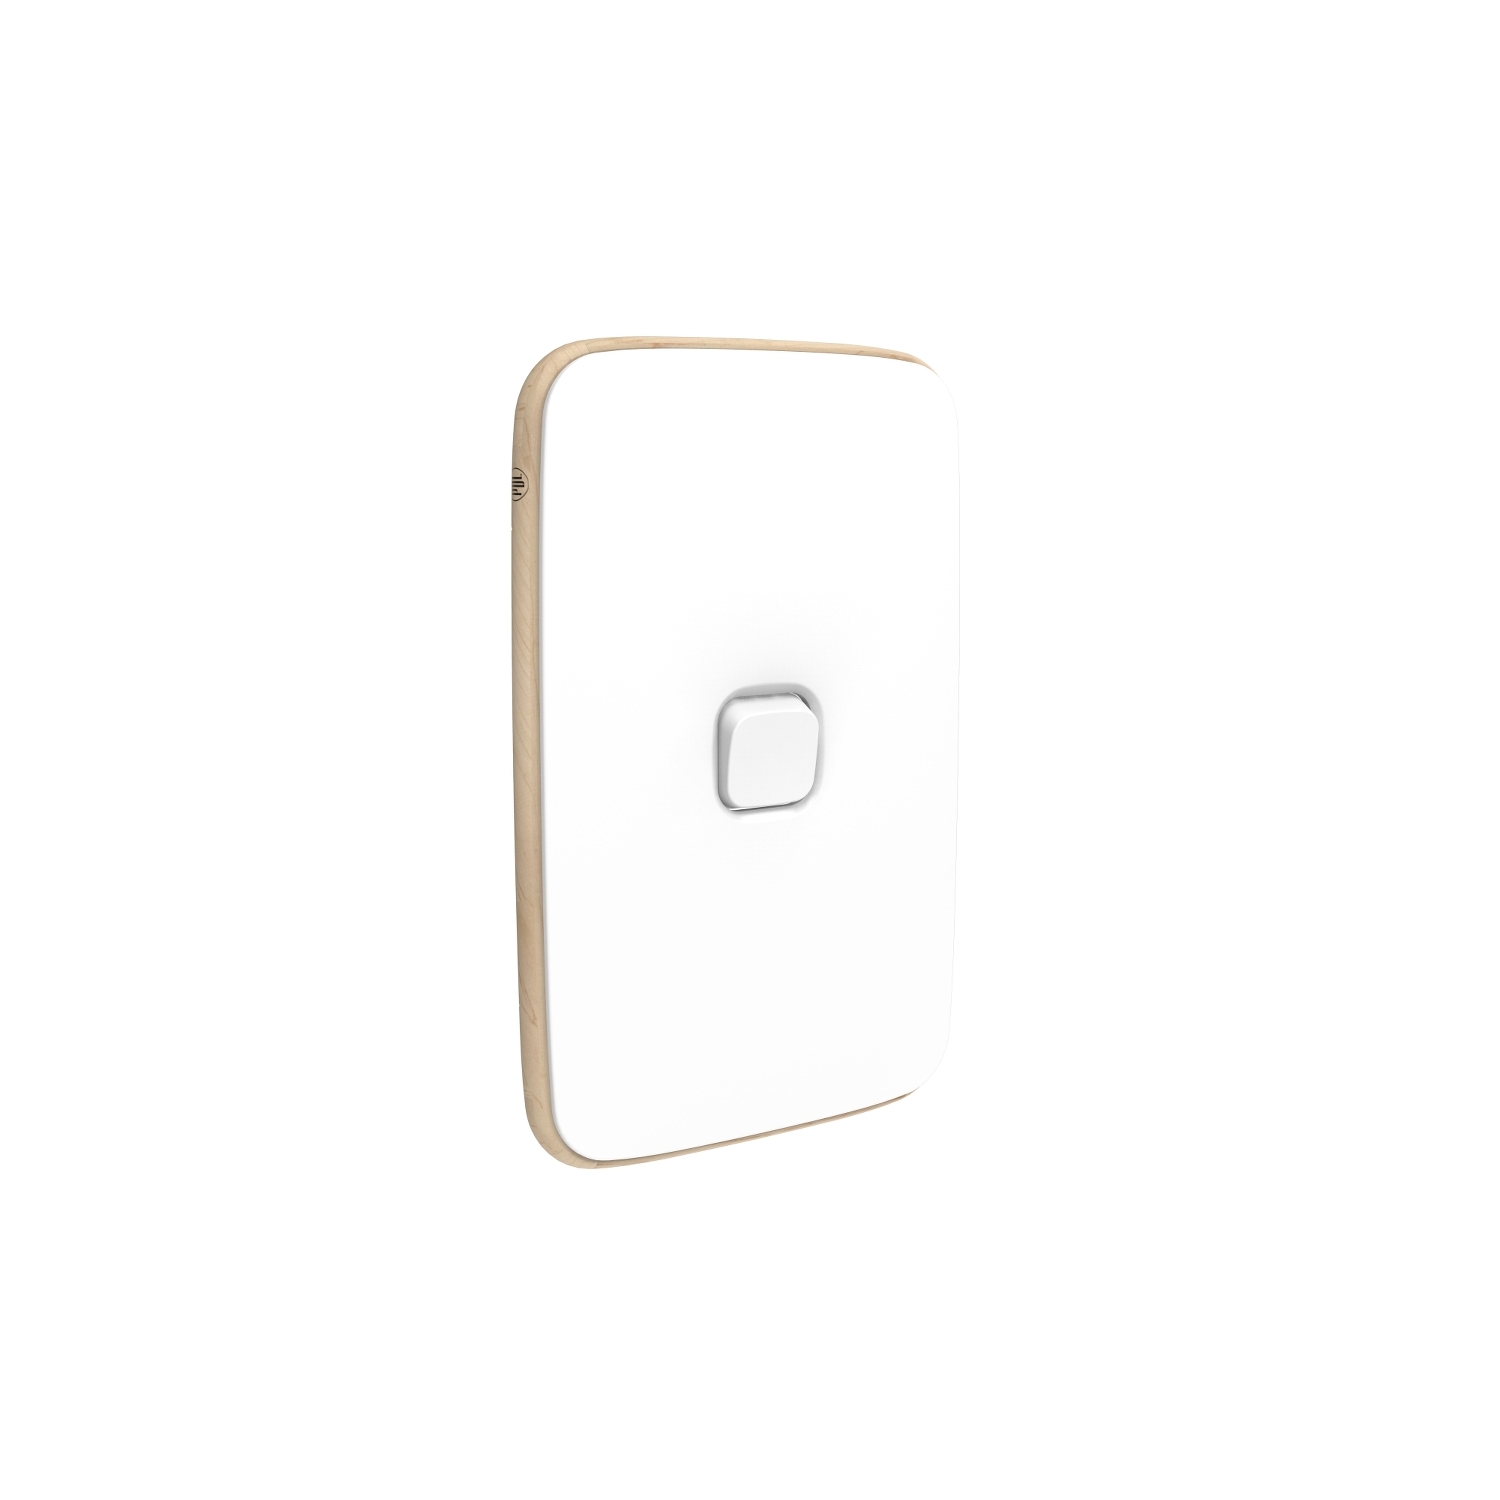 PDLE381C-AW - PDL Iconic Essence, cover frame, 1 switch, vertical - Artic White